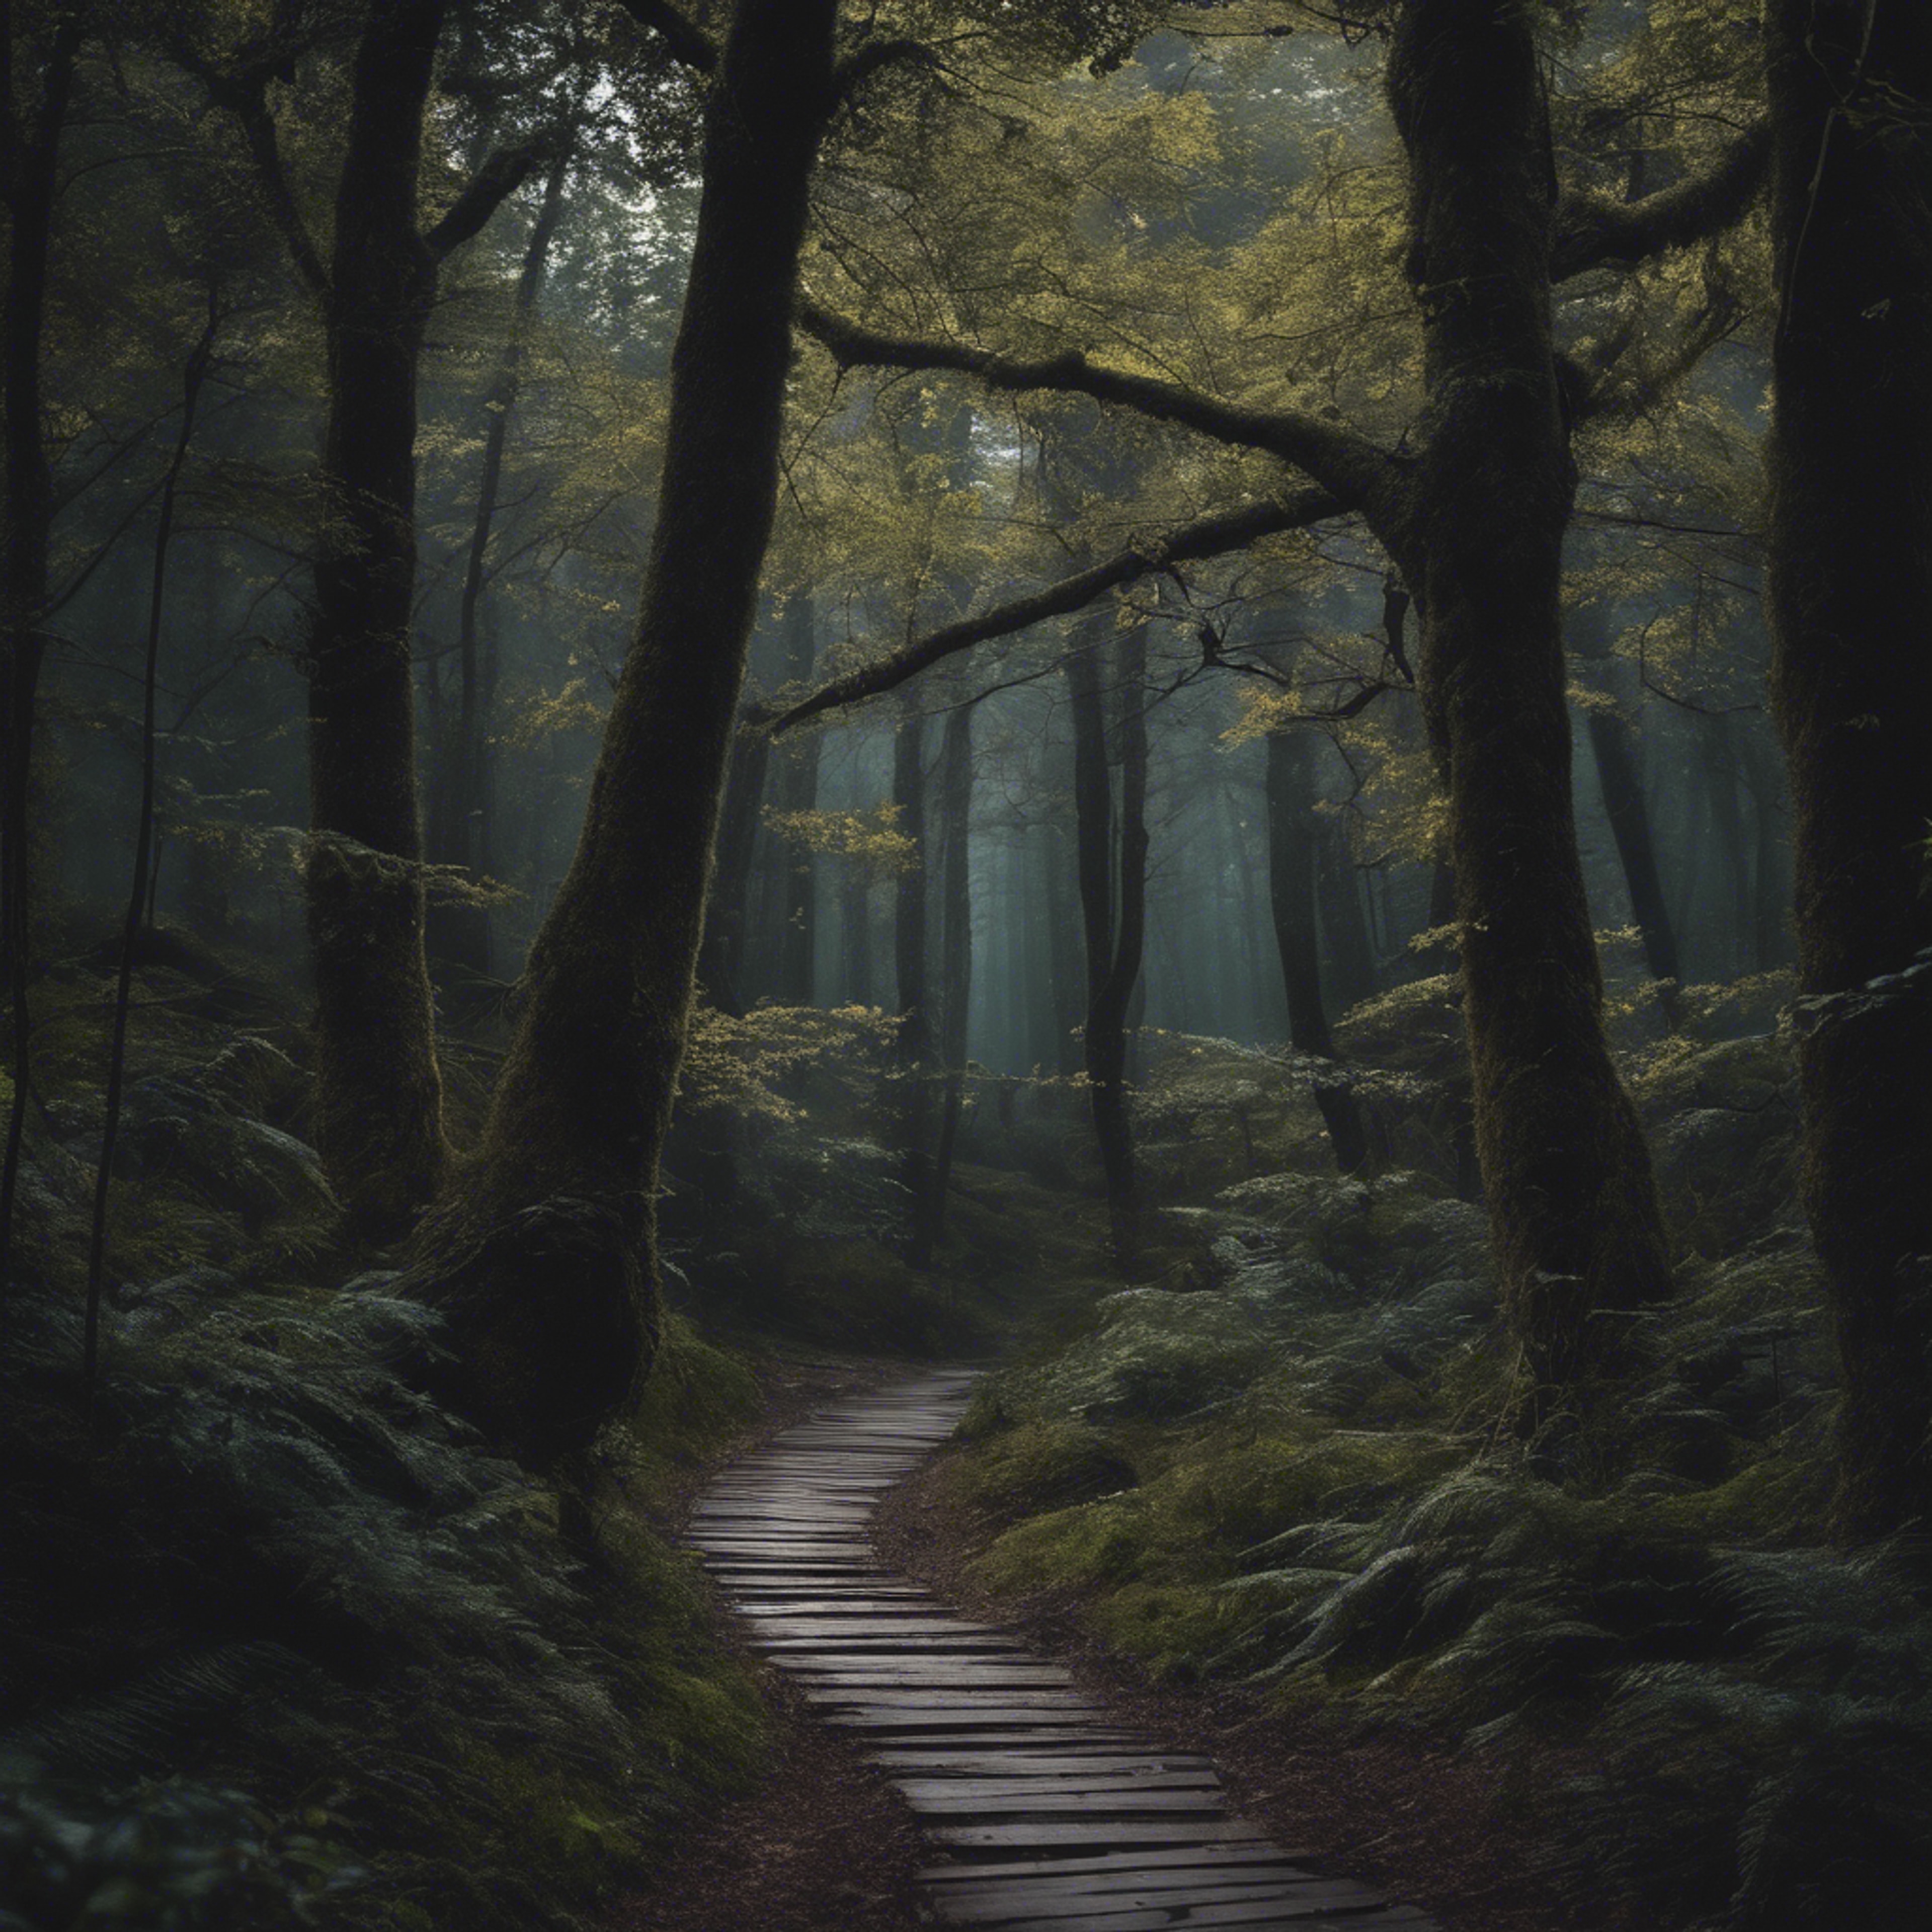 An untraveled path in a dark and mysterious forest טפט[df6a1d860b87482e8c75]